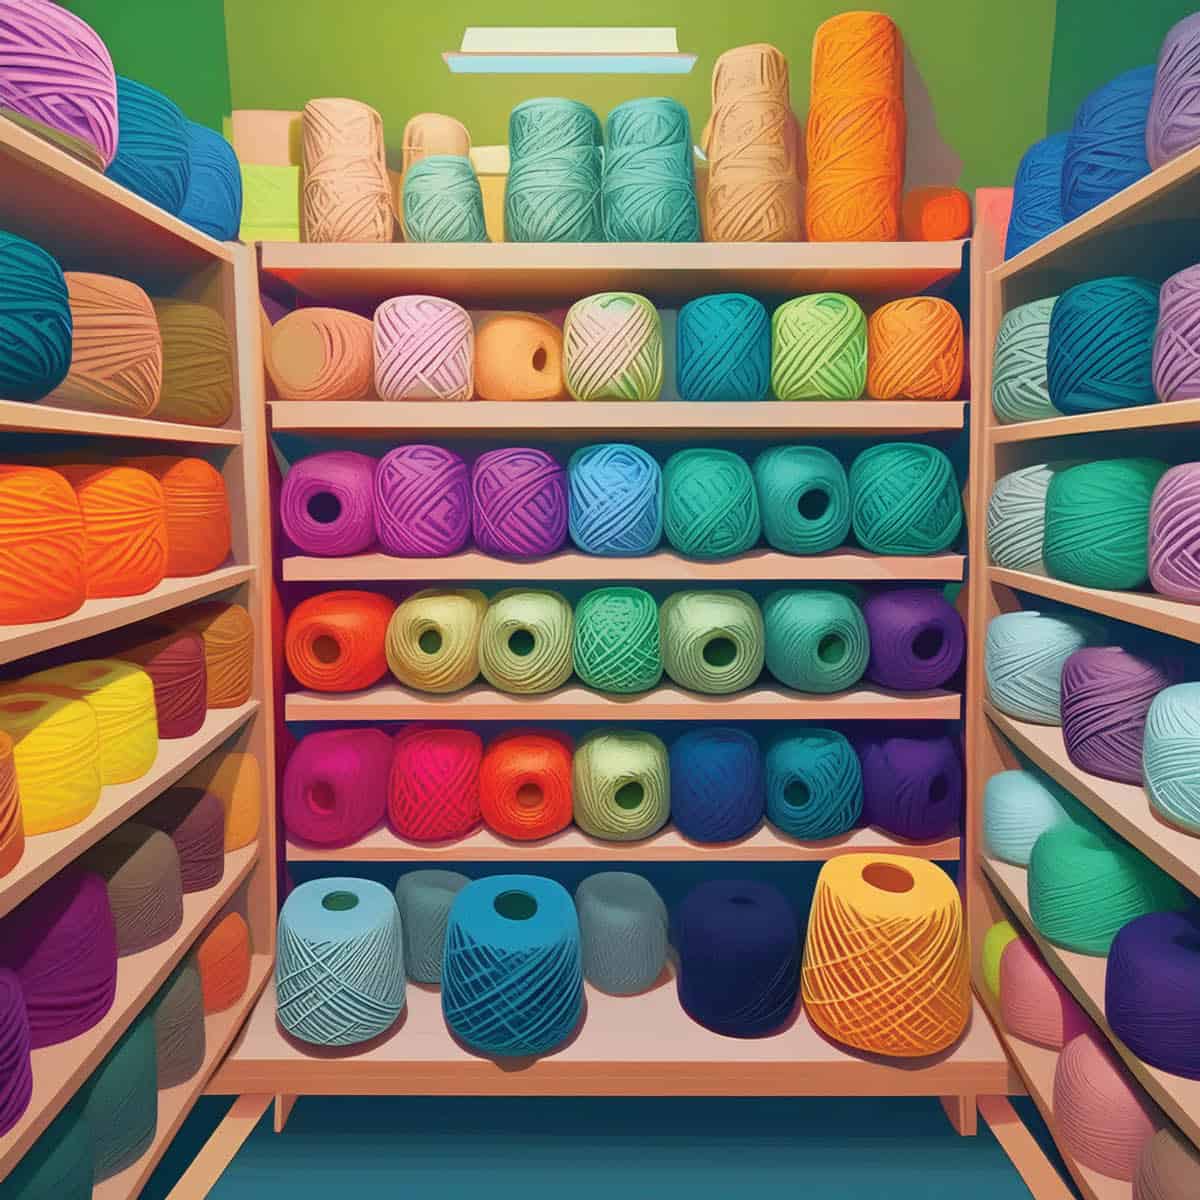 Is This Yarn Still Being Made?